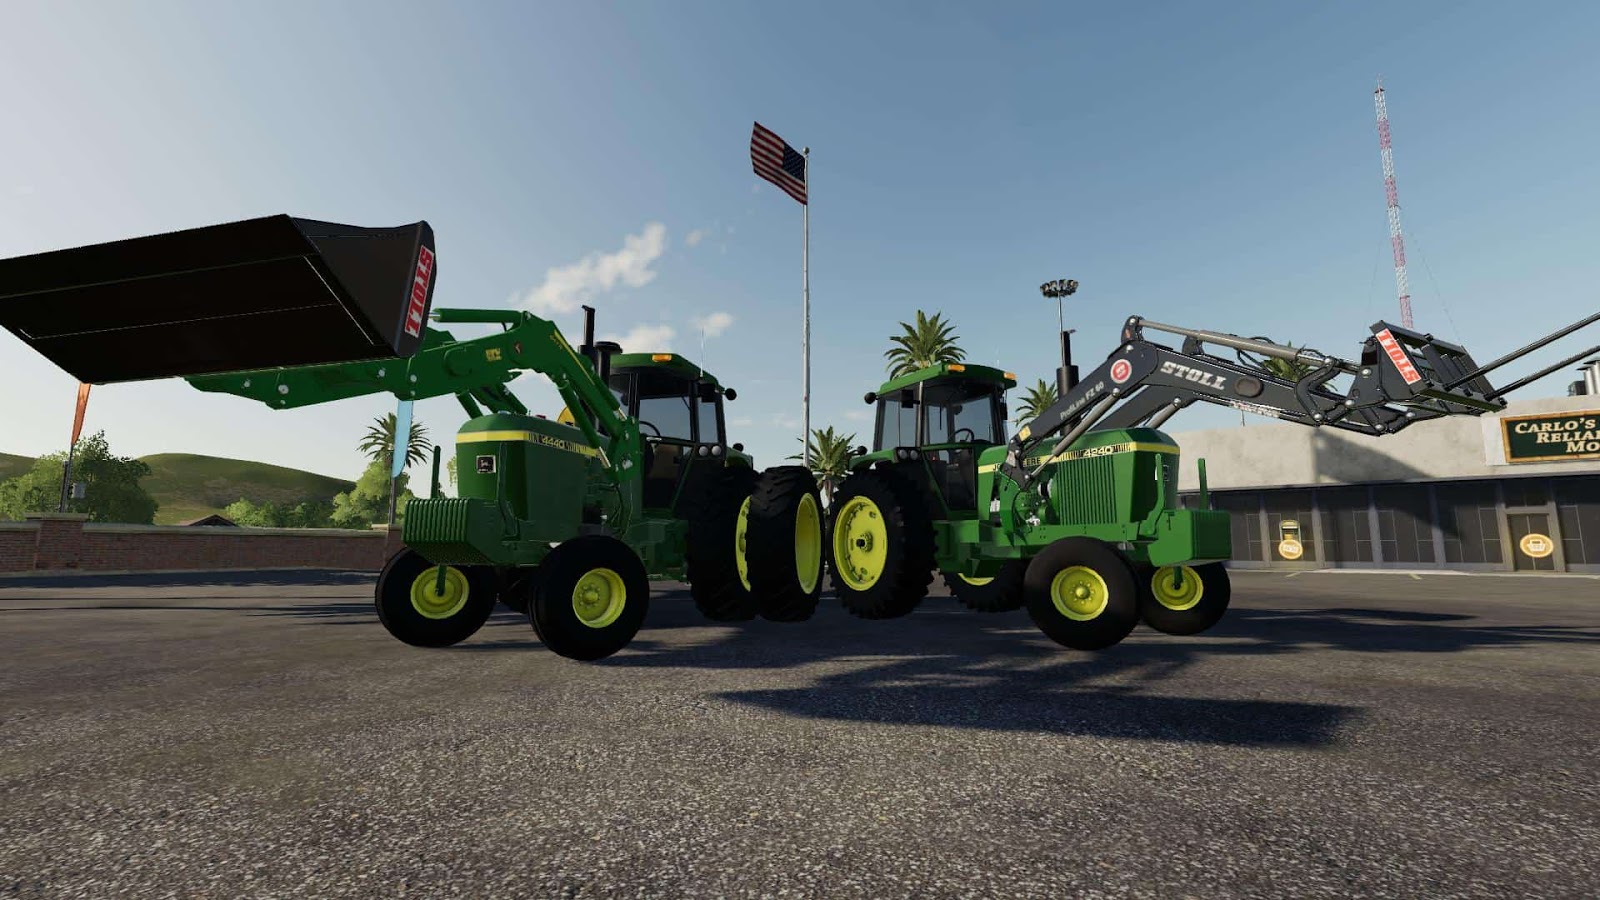 Fs19 John Deere 42404440 40 Series V11 Fs 19 And 22 Usa Mods Collection